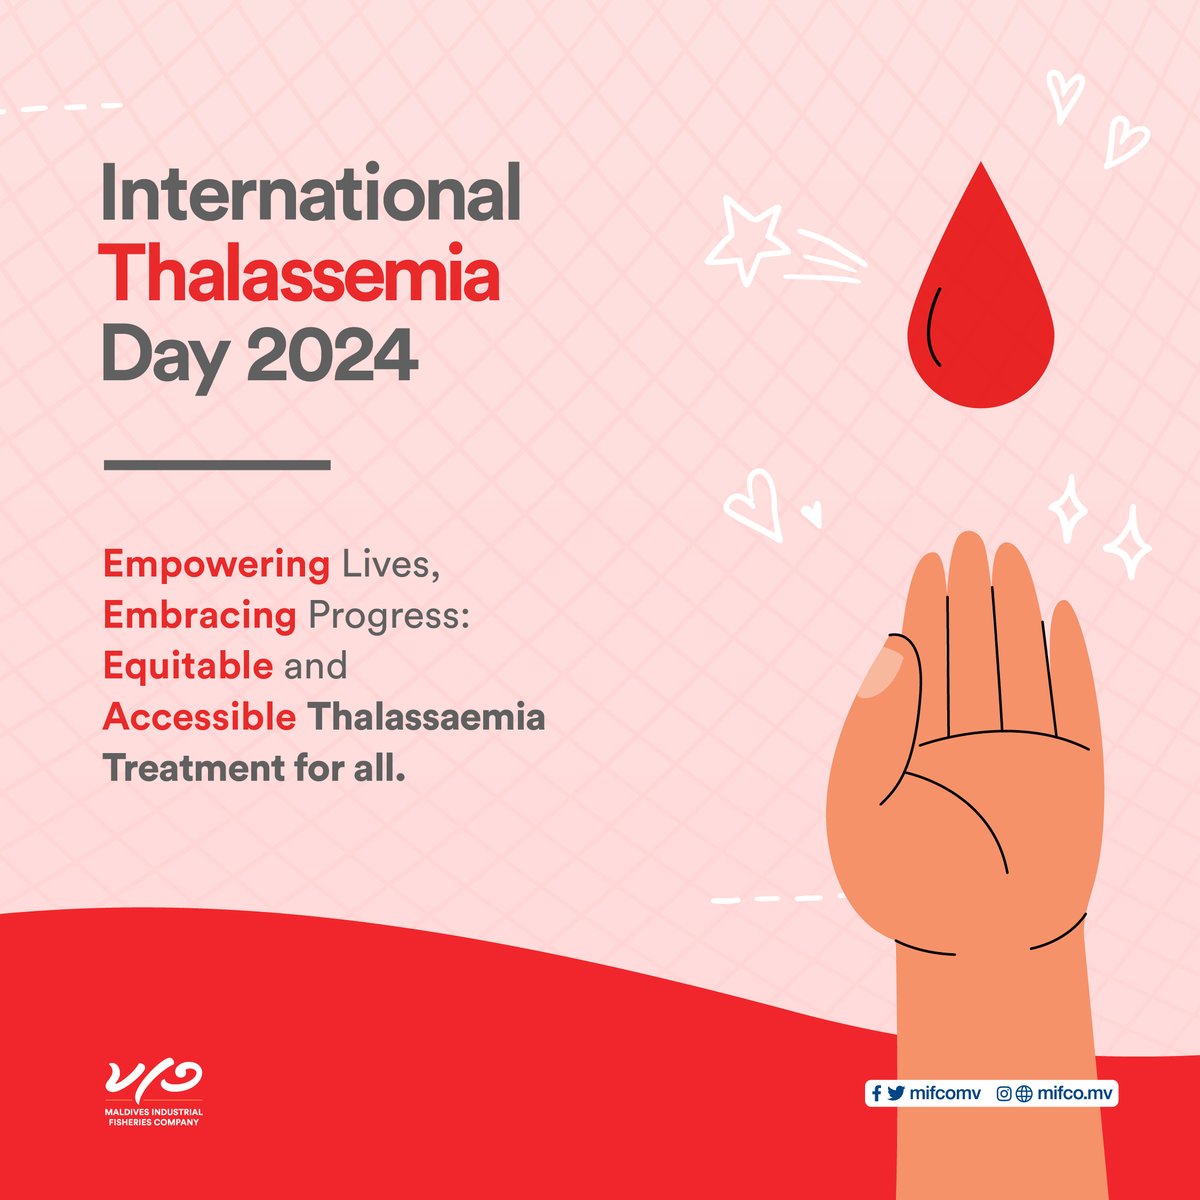 Let's unite in raising awareness on this World Thalassemia Day. We share the efforts to Empower Lives, Embrace Progress by making Equitable and Accessible healthcare for all. #TeamMifco #thalassemiaawareness #WorldThalassemiaDay